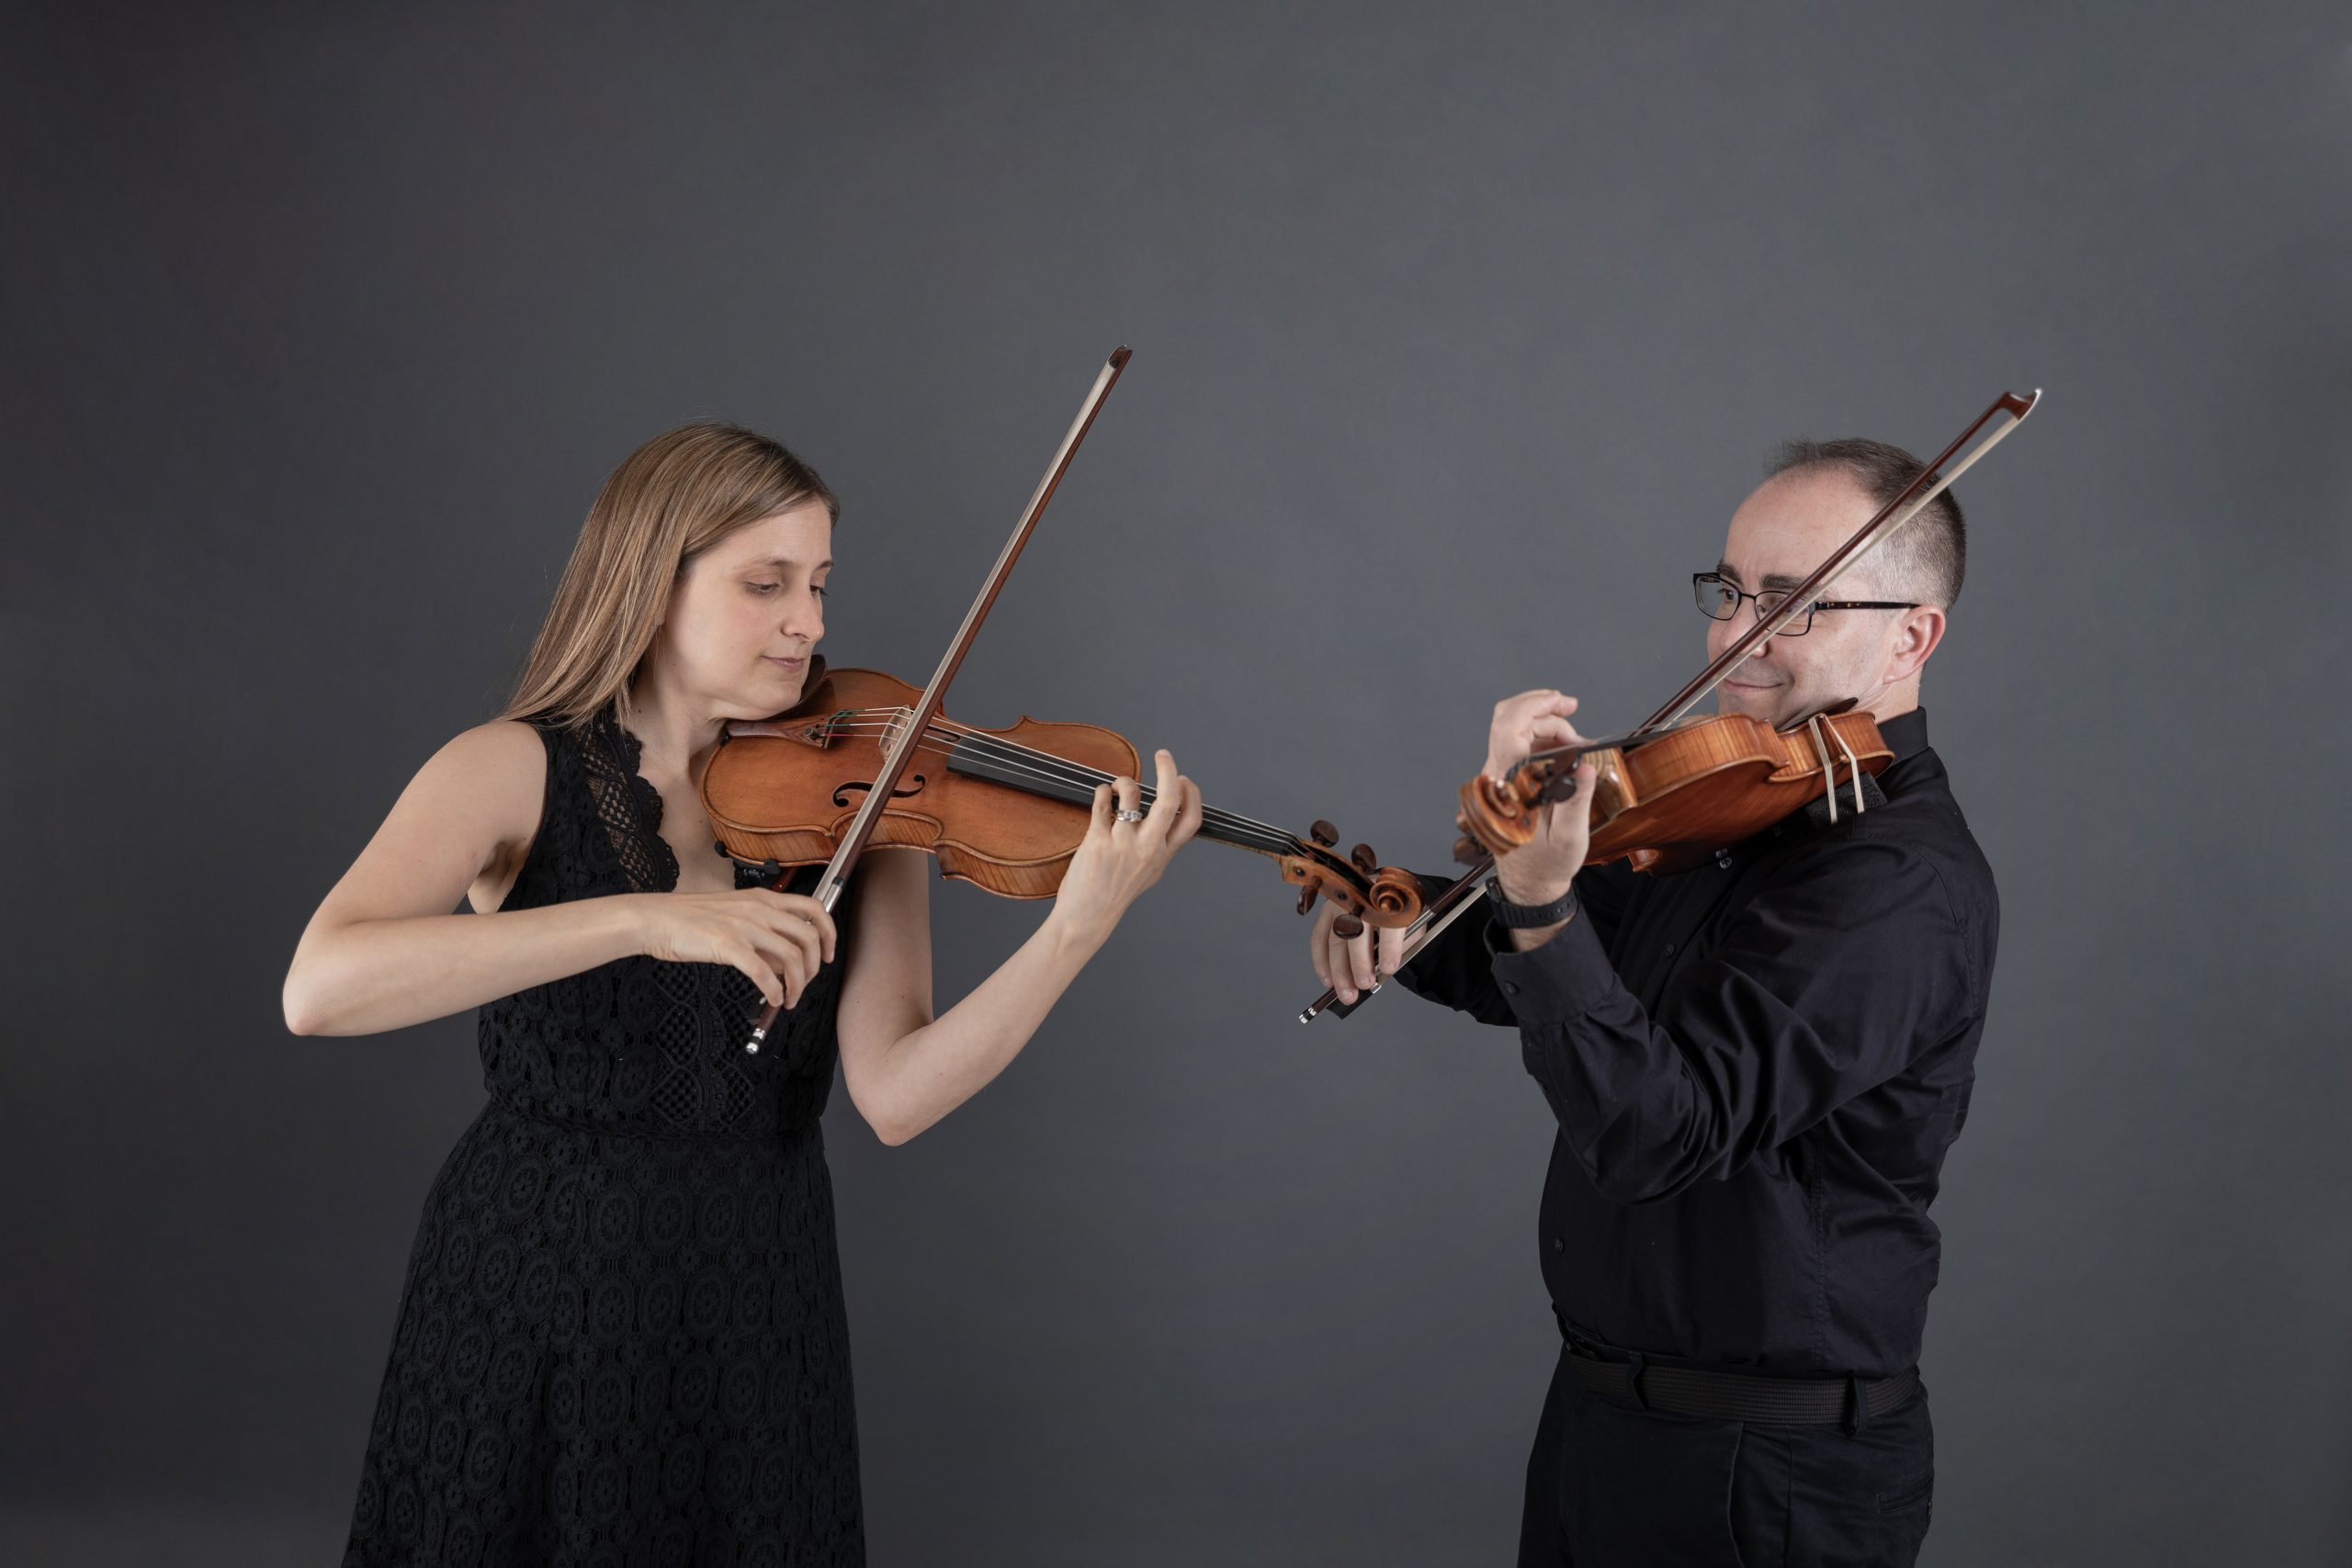 Two violinists playing together